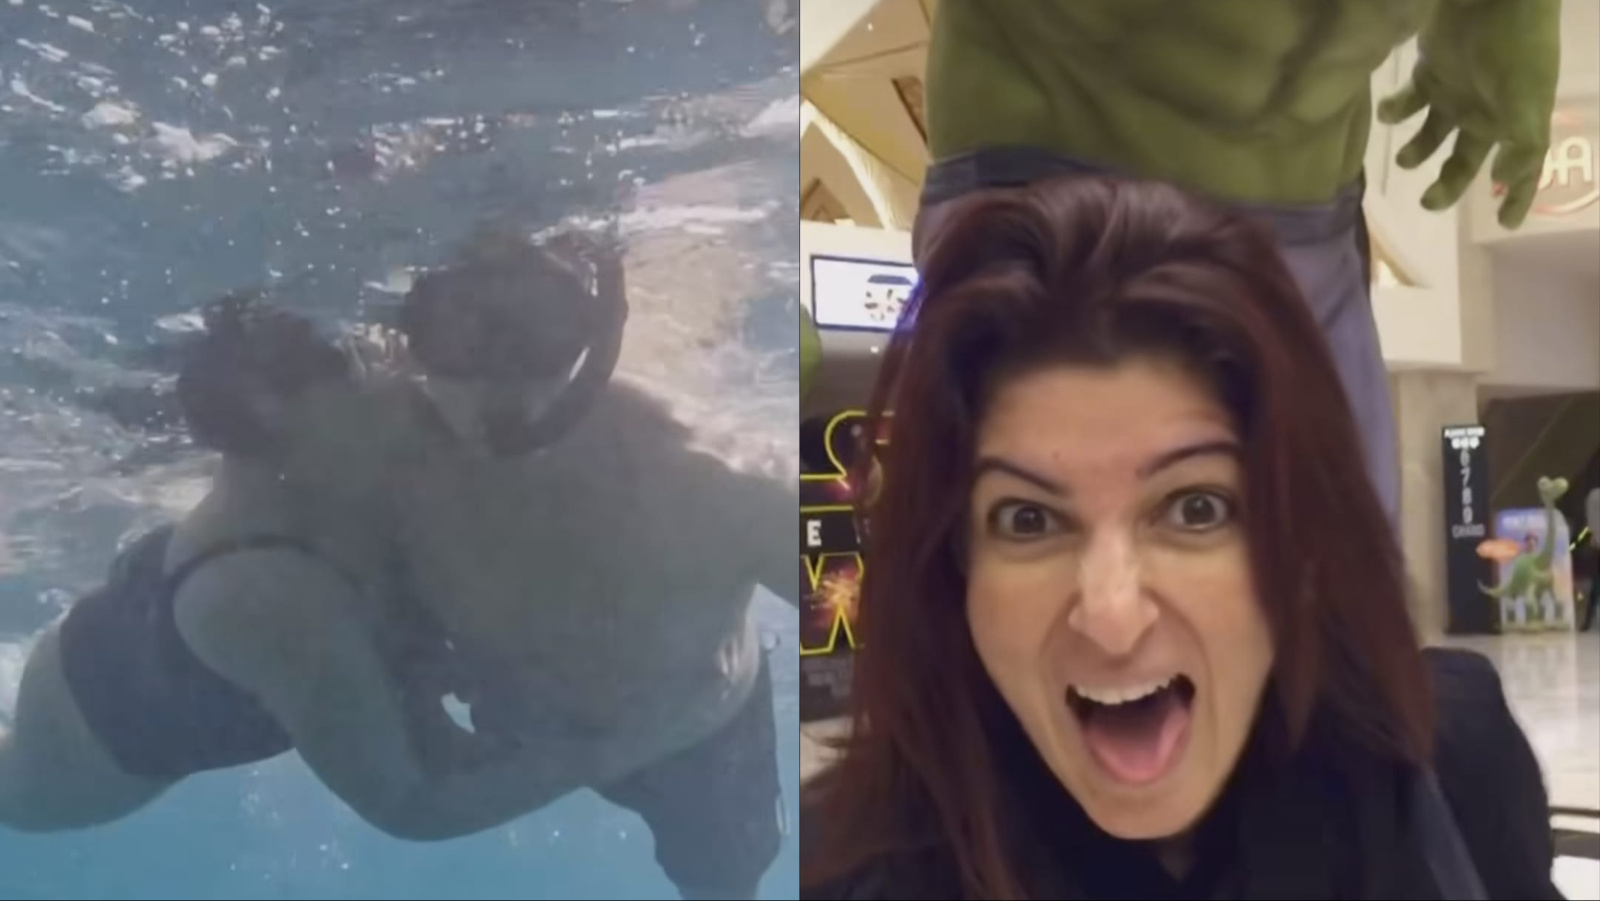 Akshay Kumar, Twinkle Khanna go scuba diving to celebrate her 50th birthday, share underwater kiss. See here | Bollywood News - The Indian Express